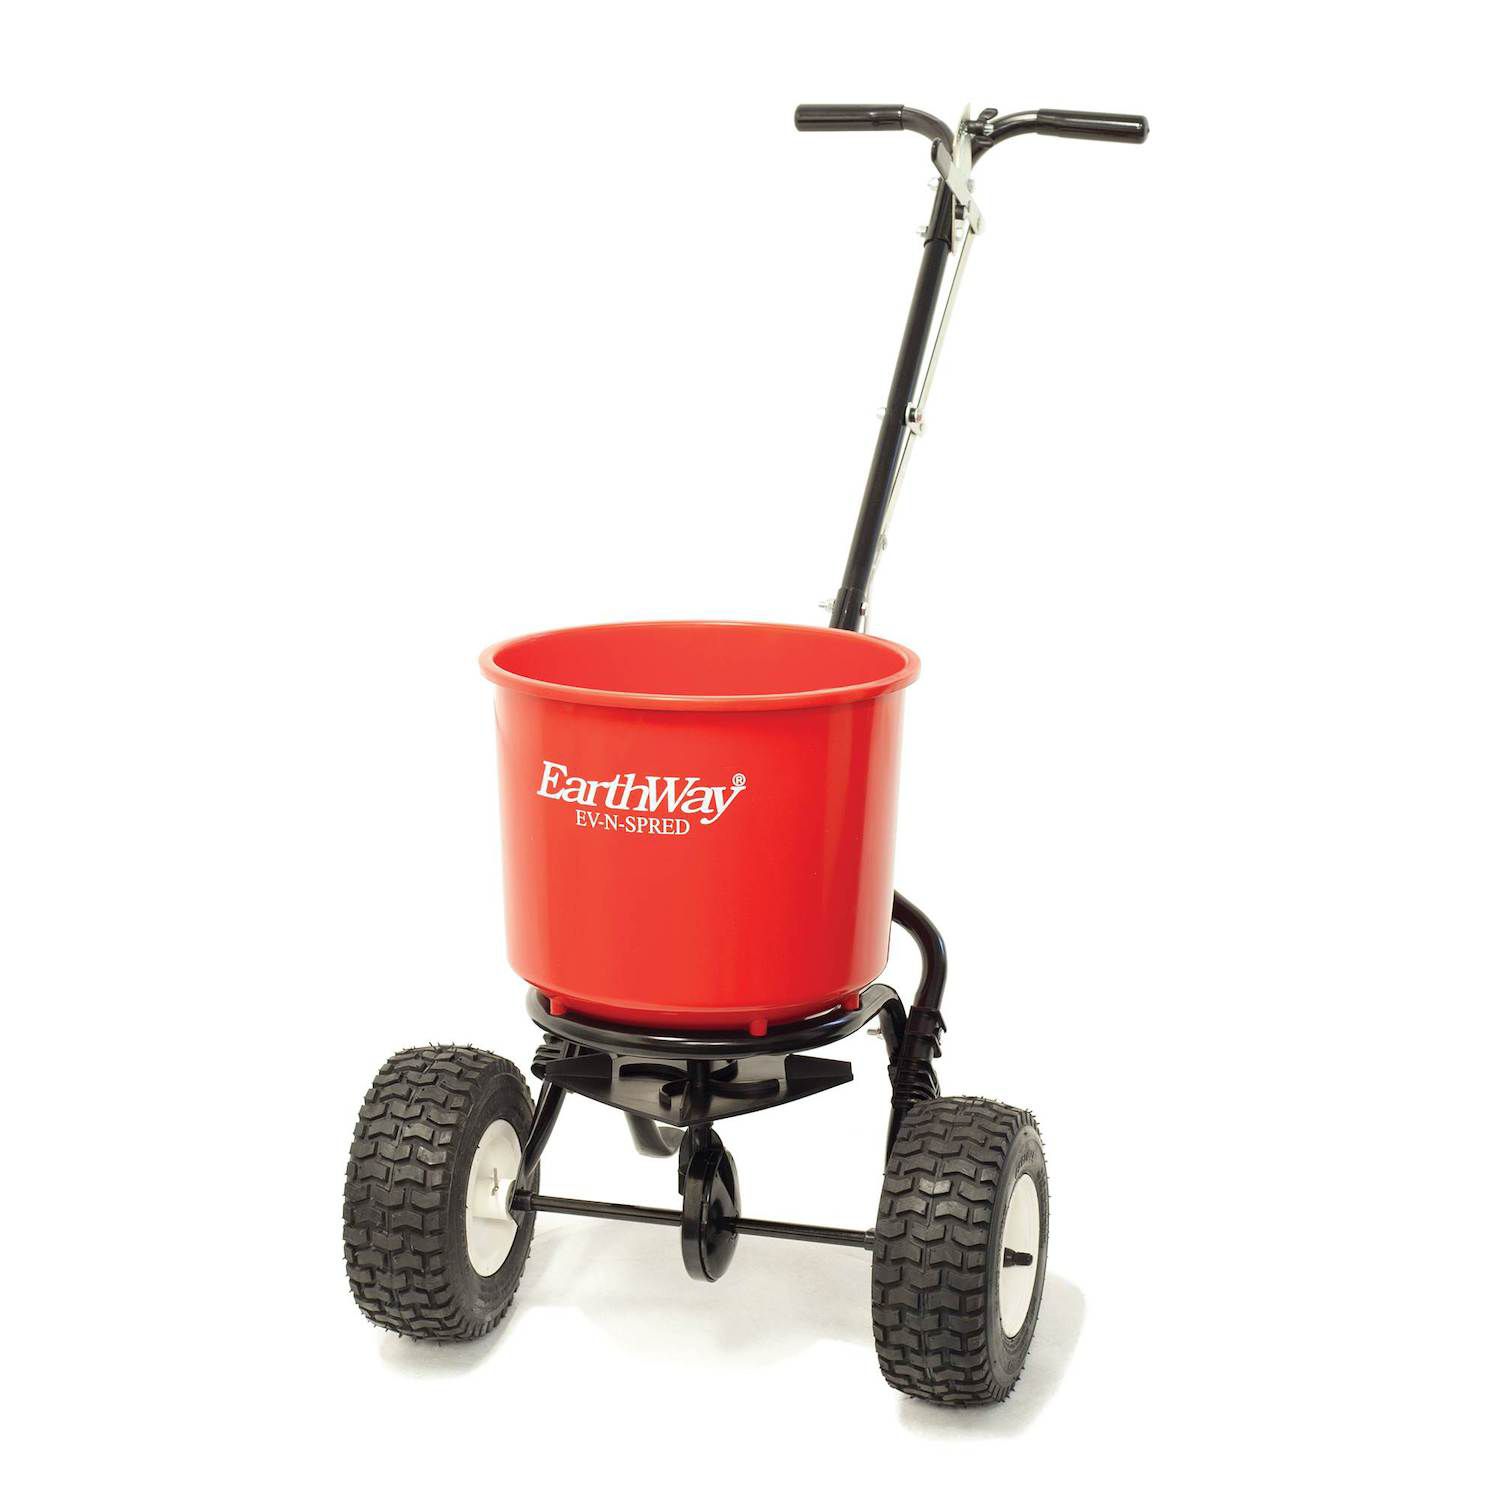 Image for Earthway 2600A Plus Commercial 40 Pound Capacity Seed and Fertilizer Spreader at Kohl's.